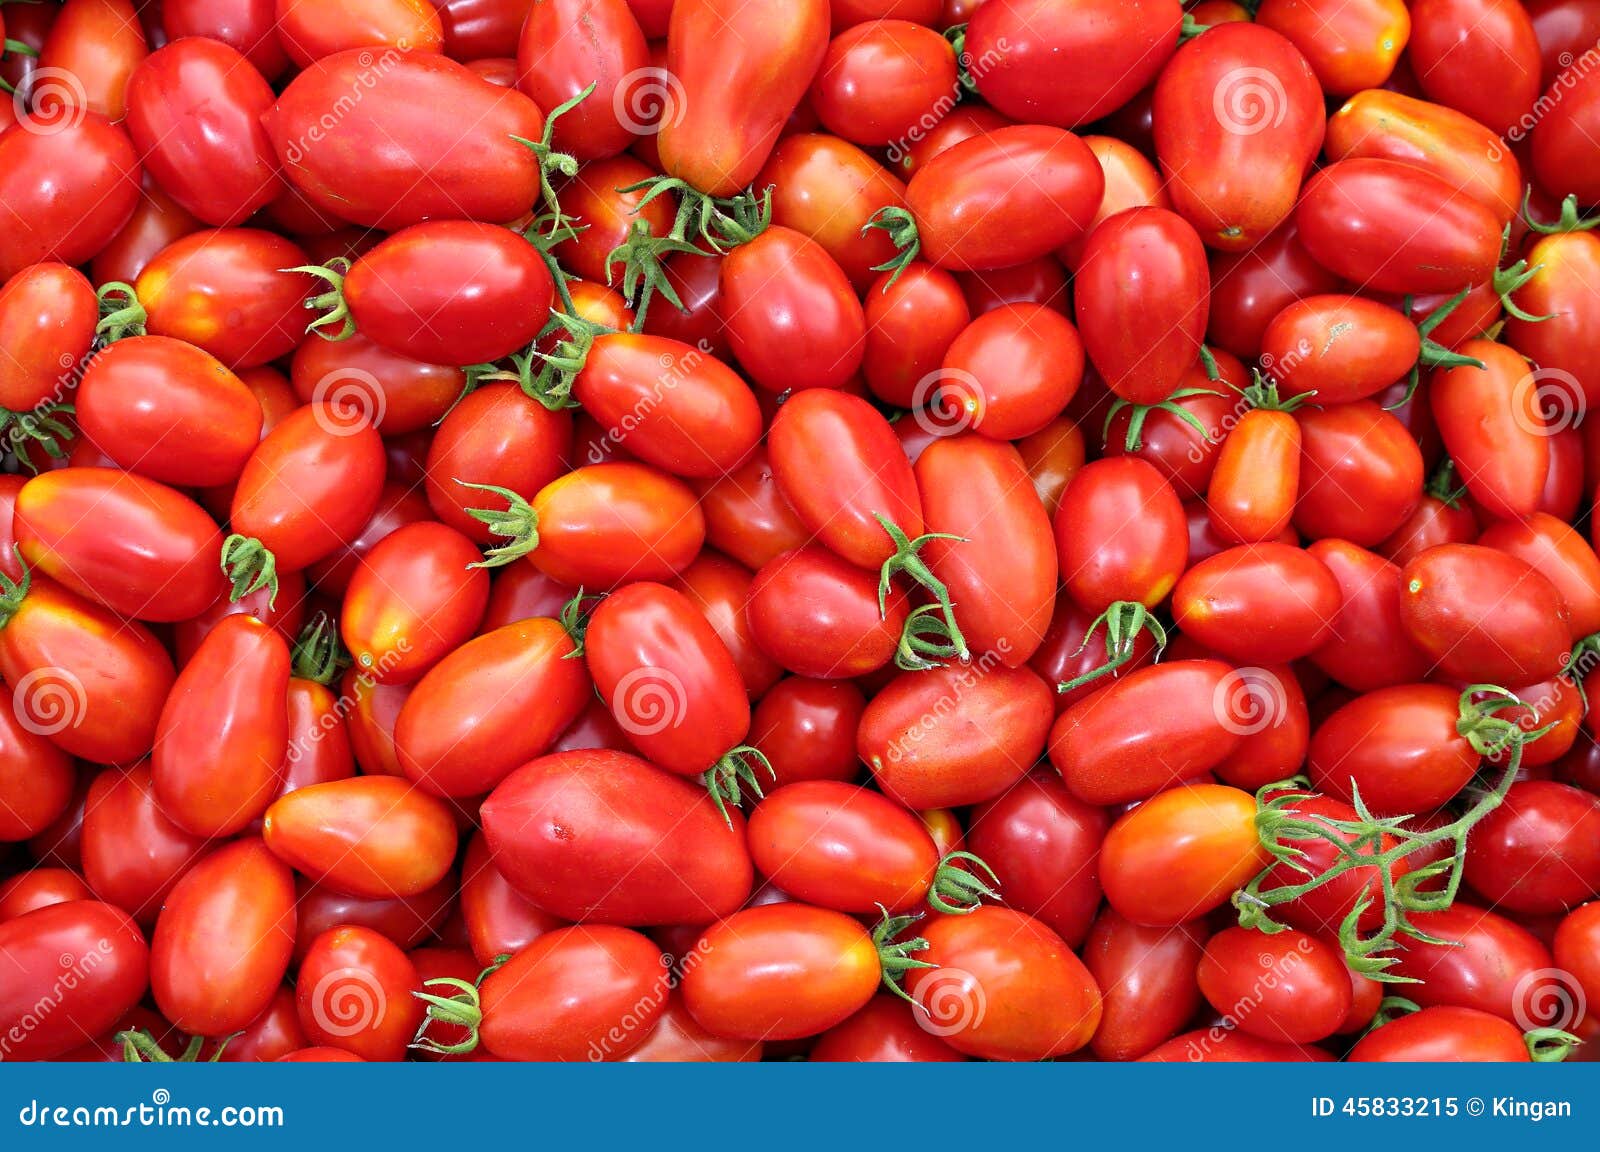 background of the plurality of red tomatoes